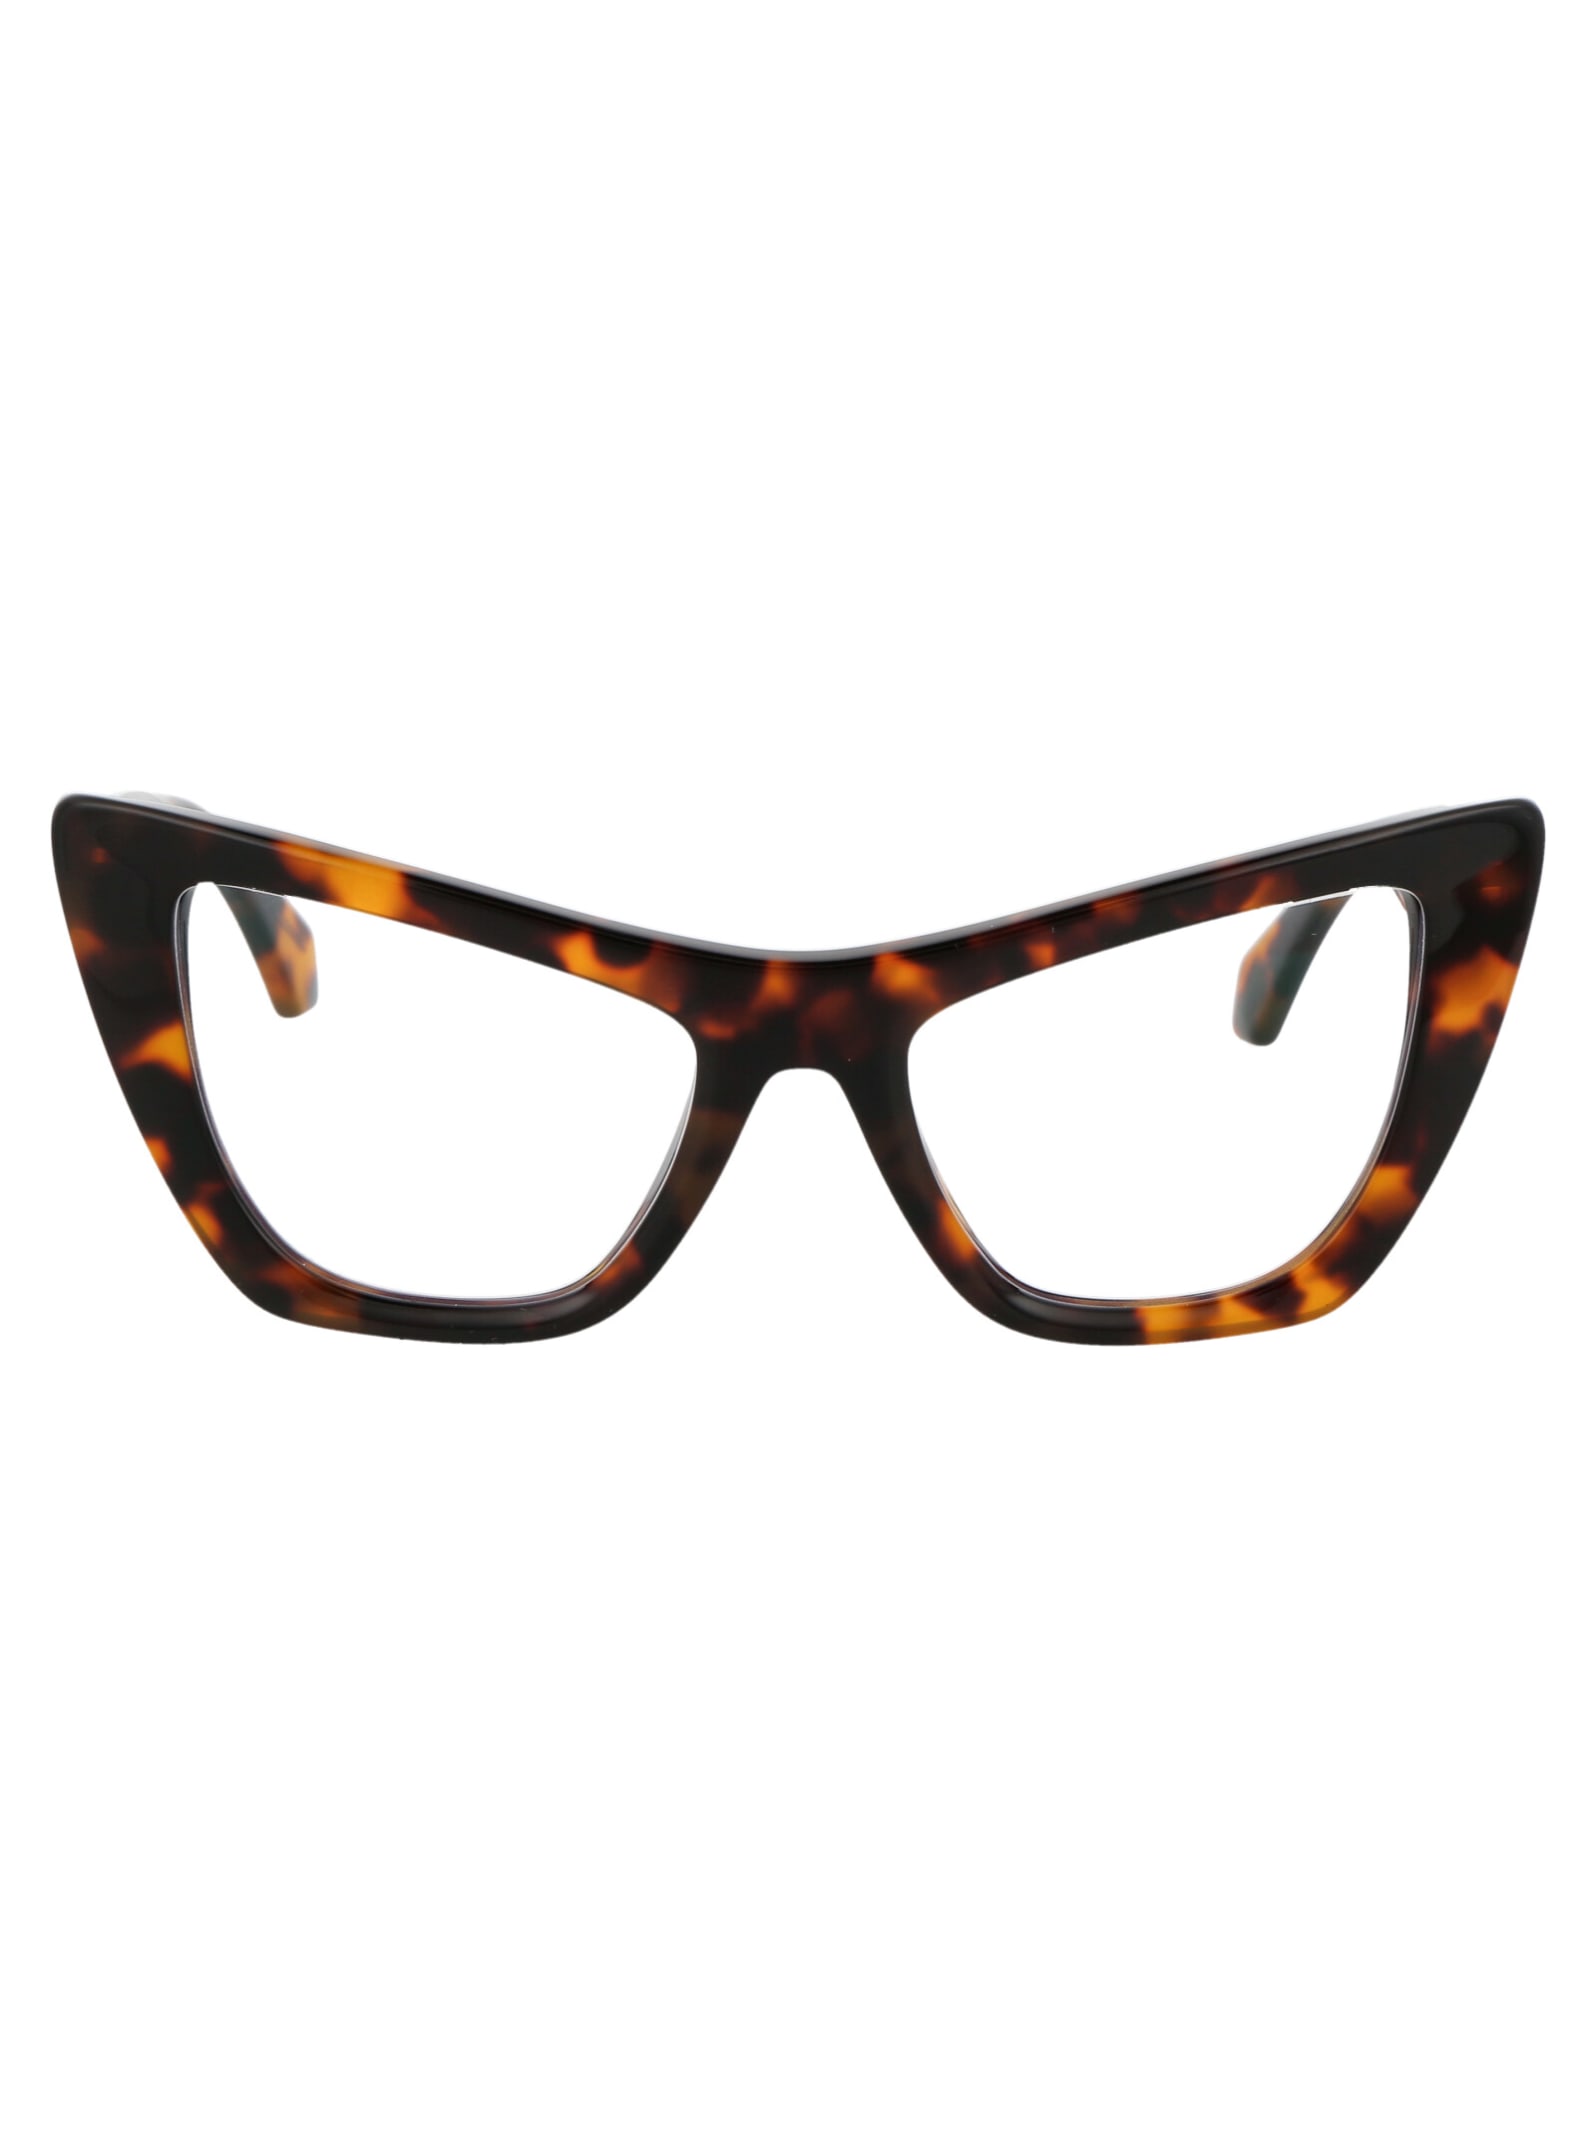 Off-White Optical Style 11 Glasses